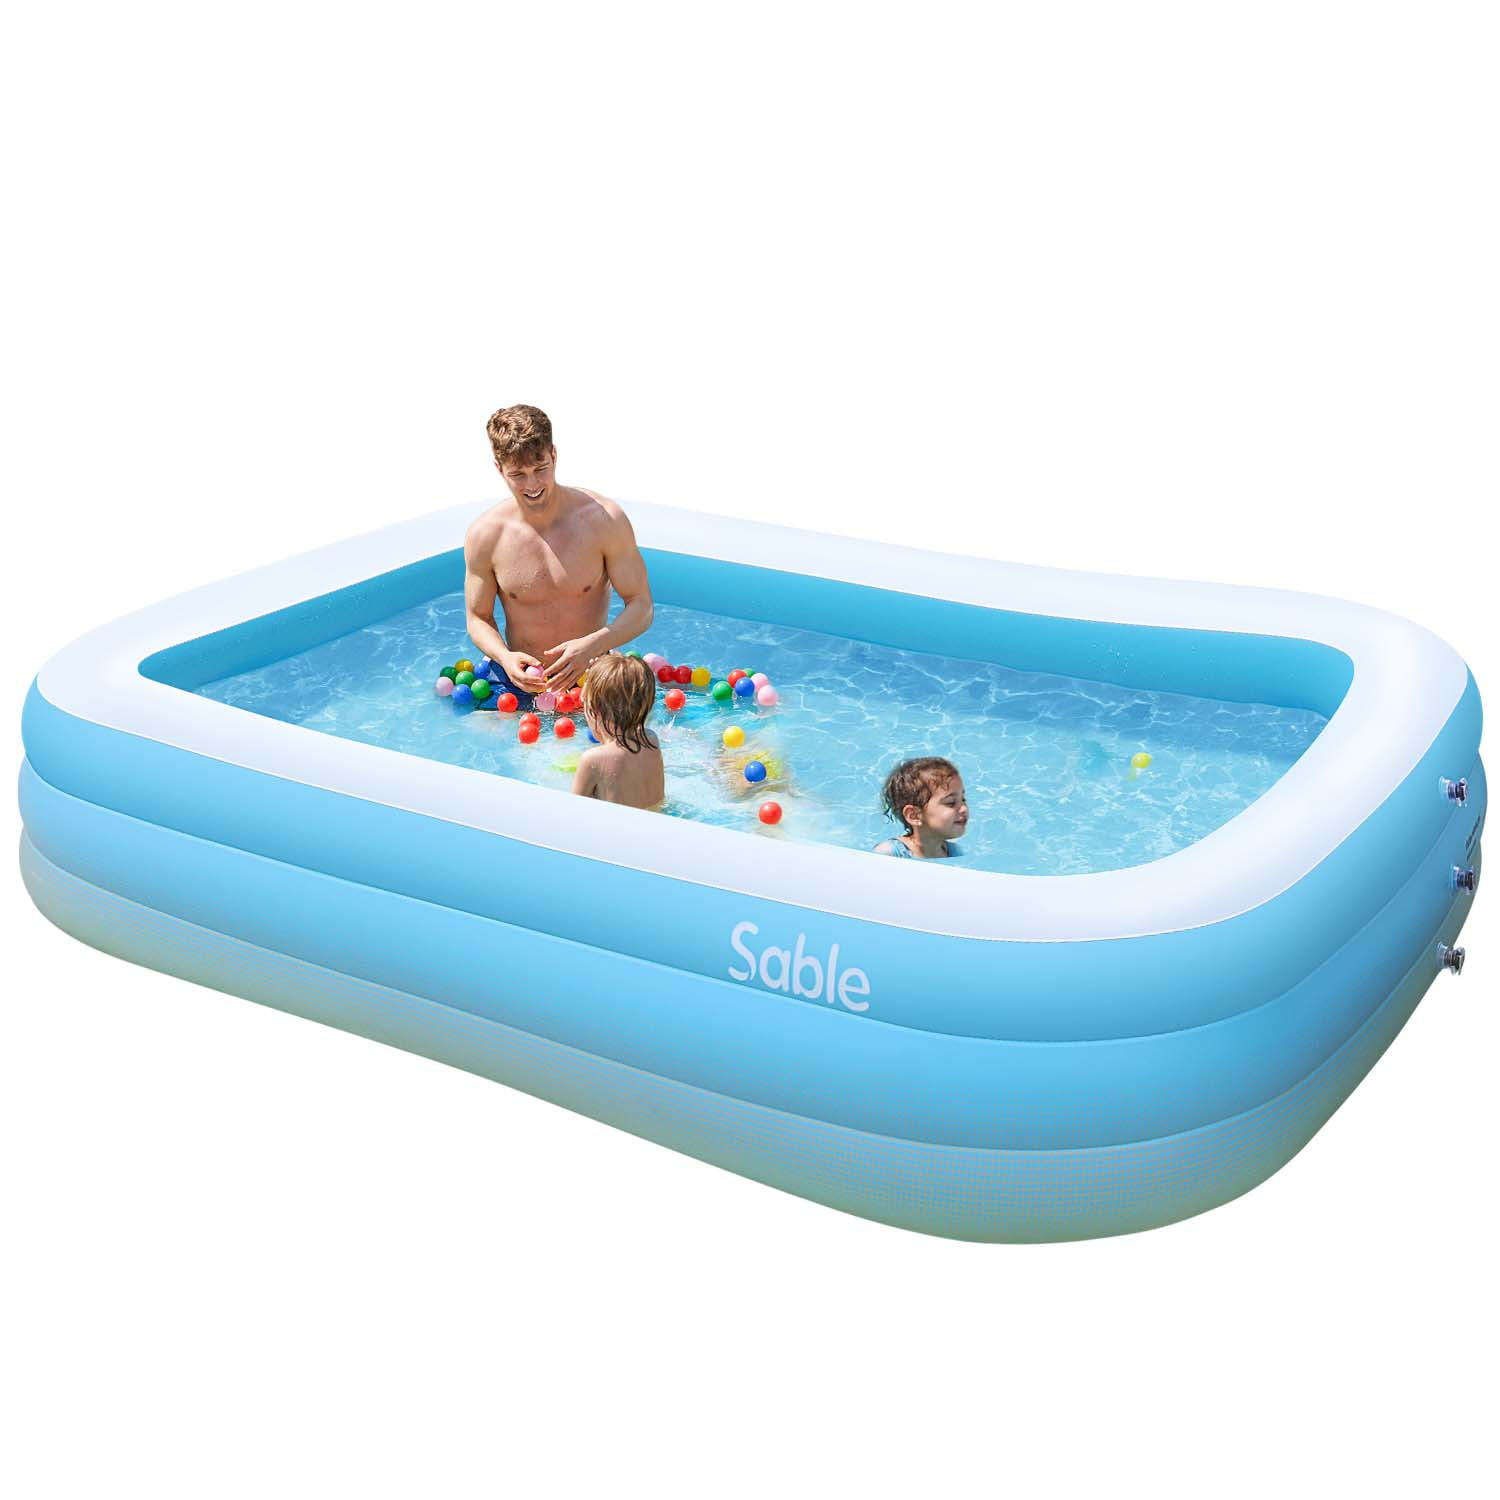 Inflatable Paddling Swimming Pool Outdoor Garden Family Size 50m x 175m x 260cm 